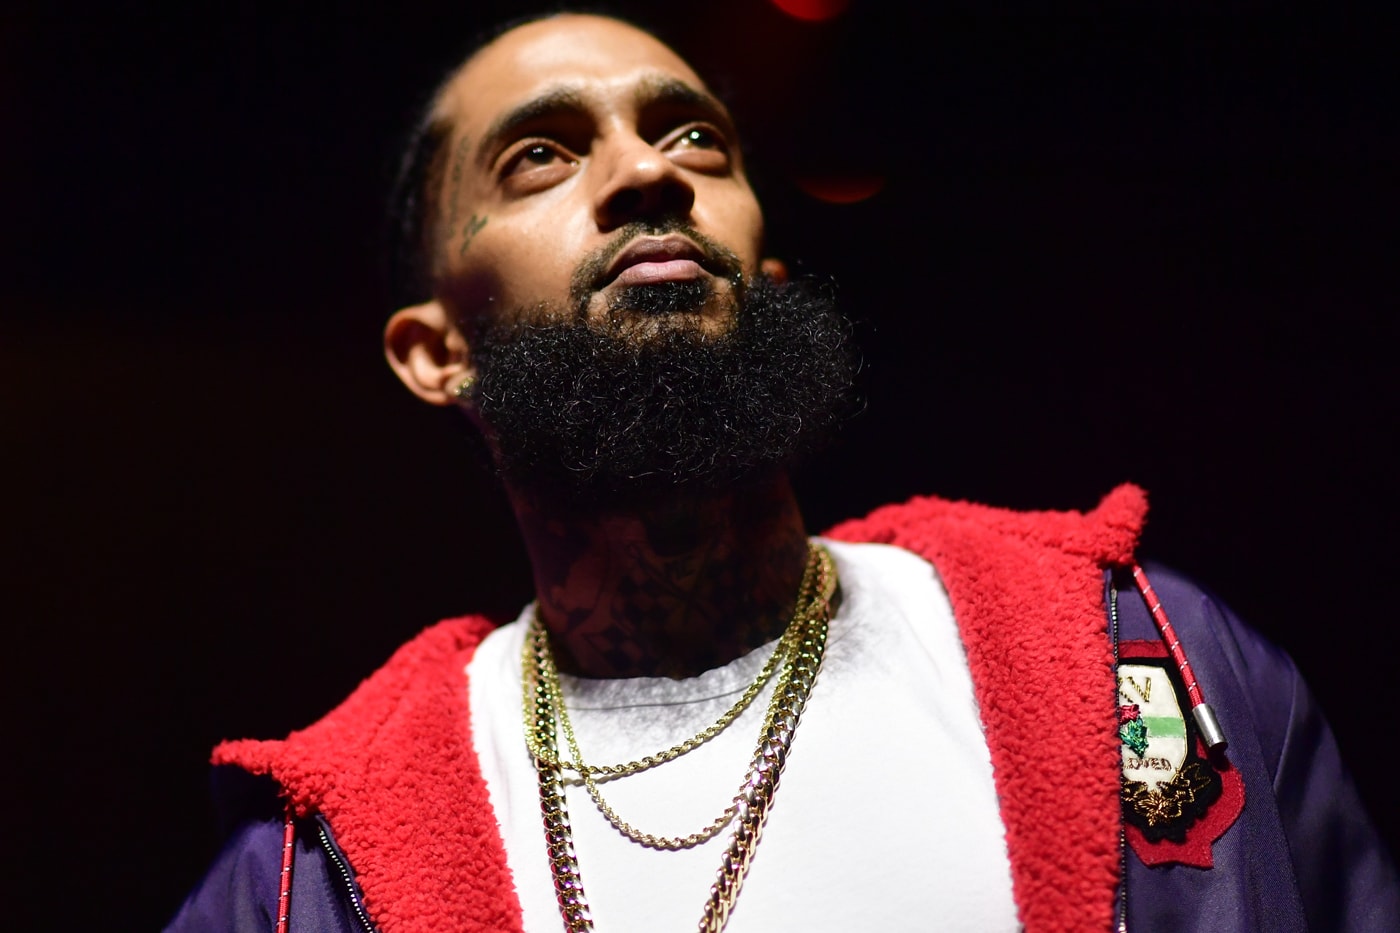 Nipsey Hussle Alleged Killer Eric Holder Indicted Grand Jury One count of murder, two counts of attempted murder felon firearm video footage